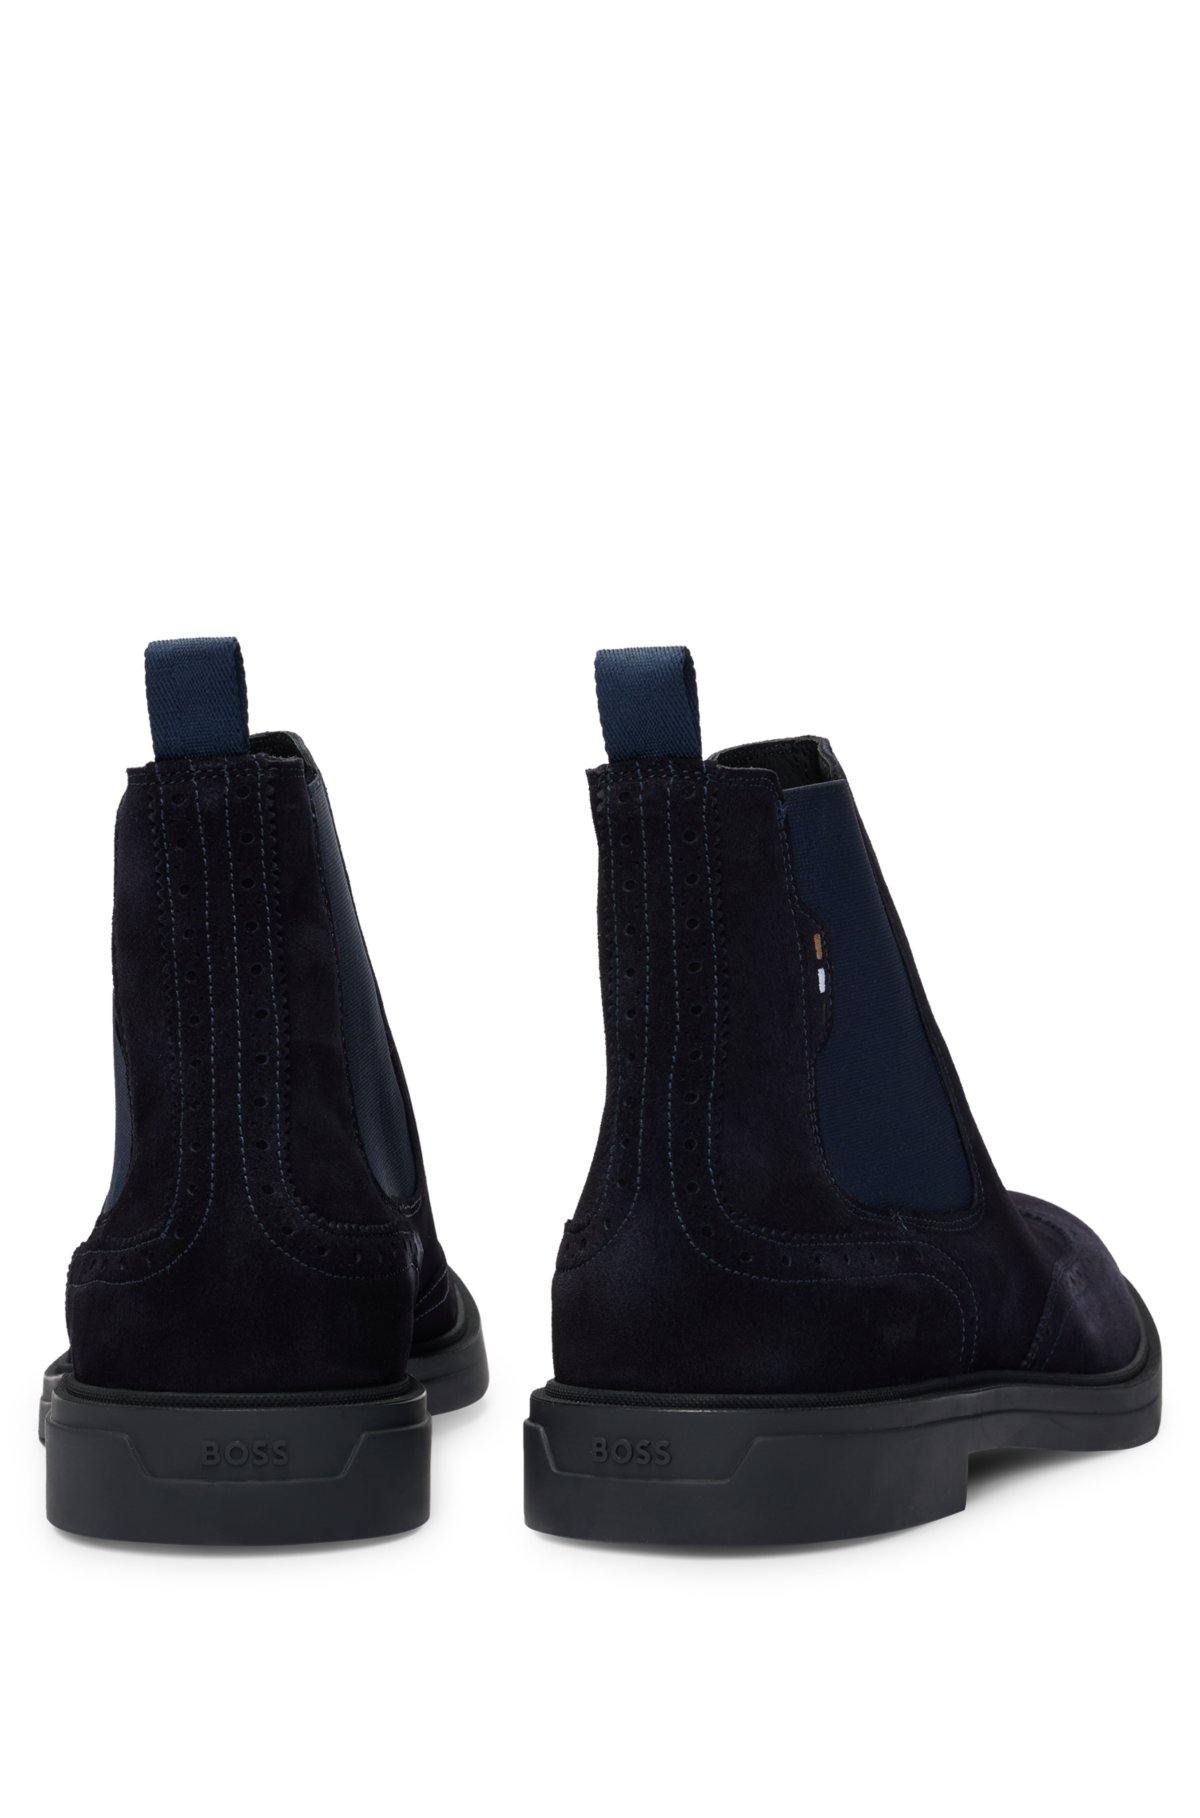 Suede Chelsea boots with brogue details, Dark Blue